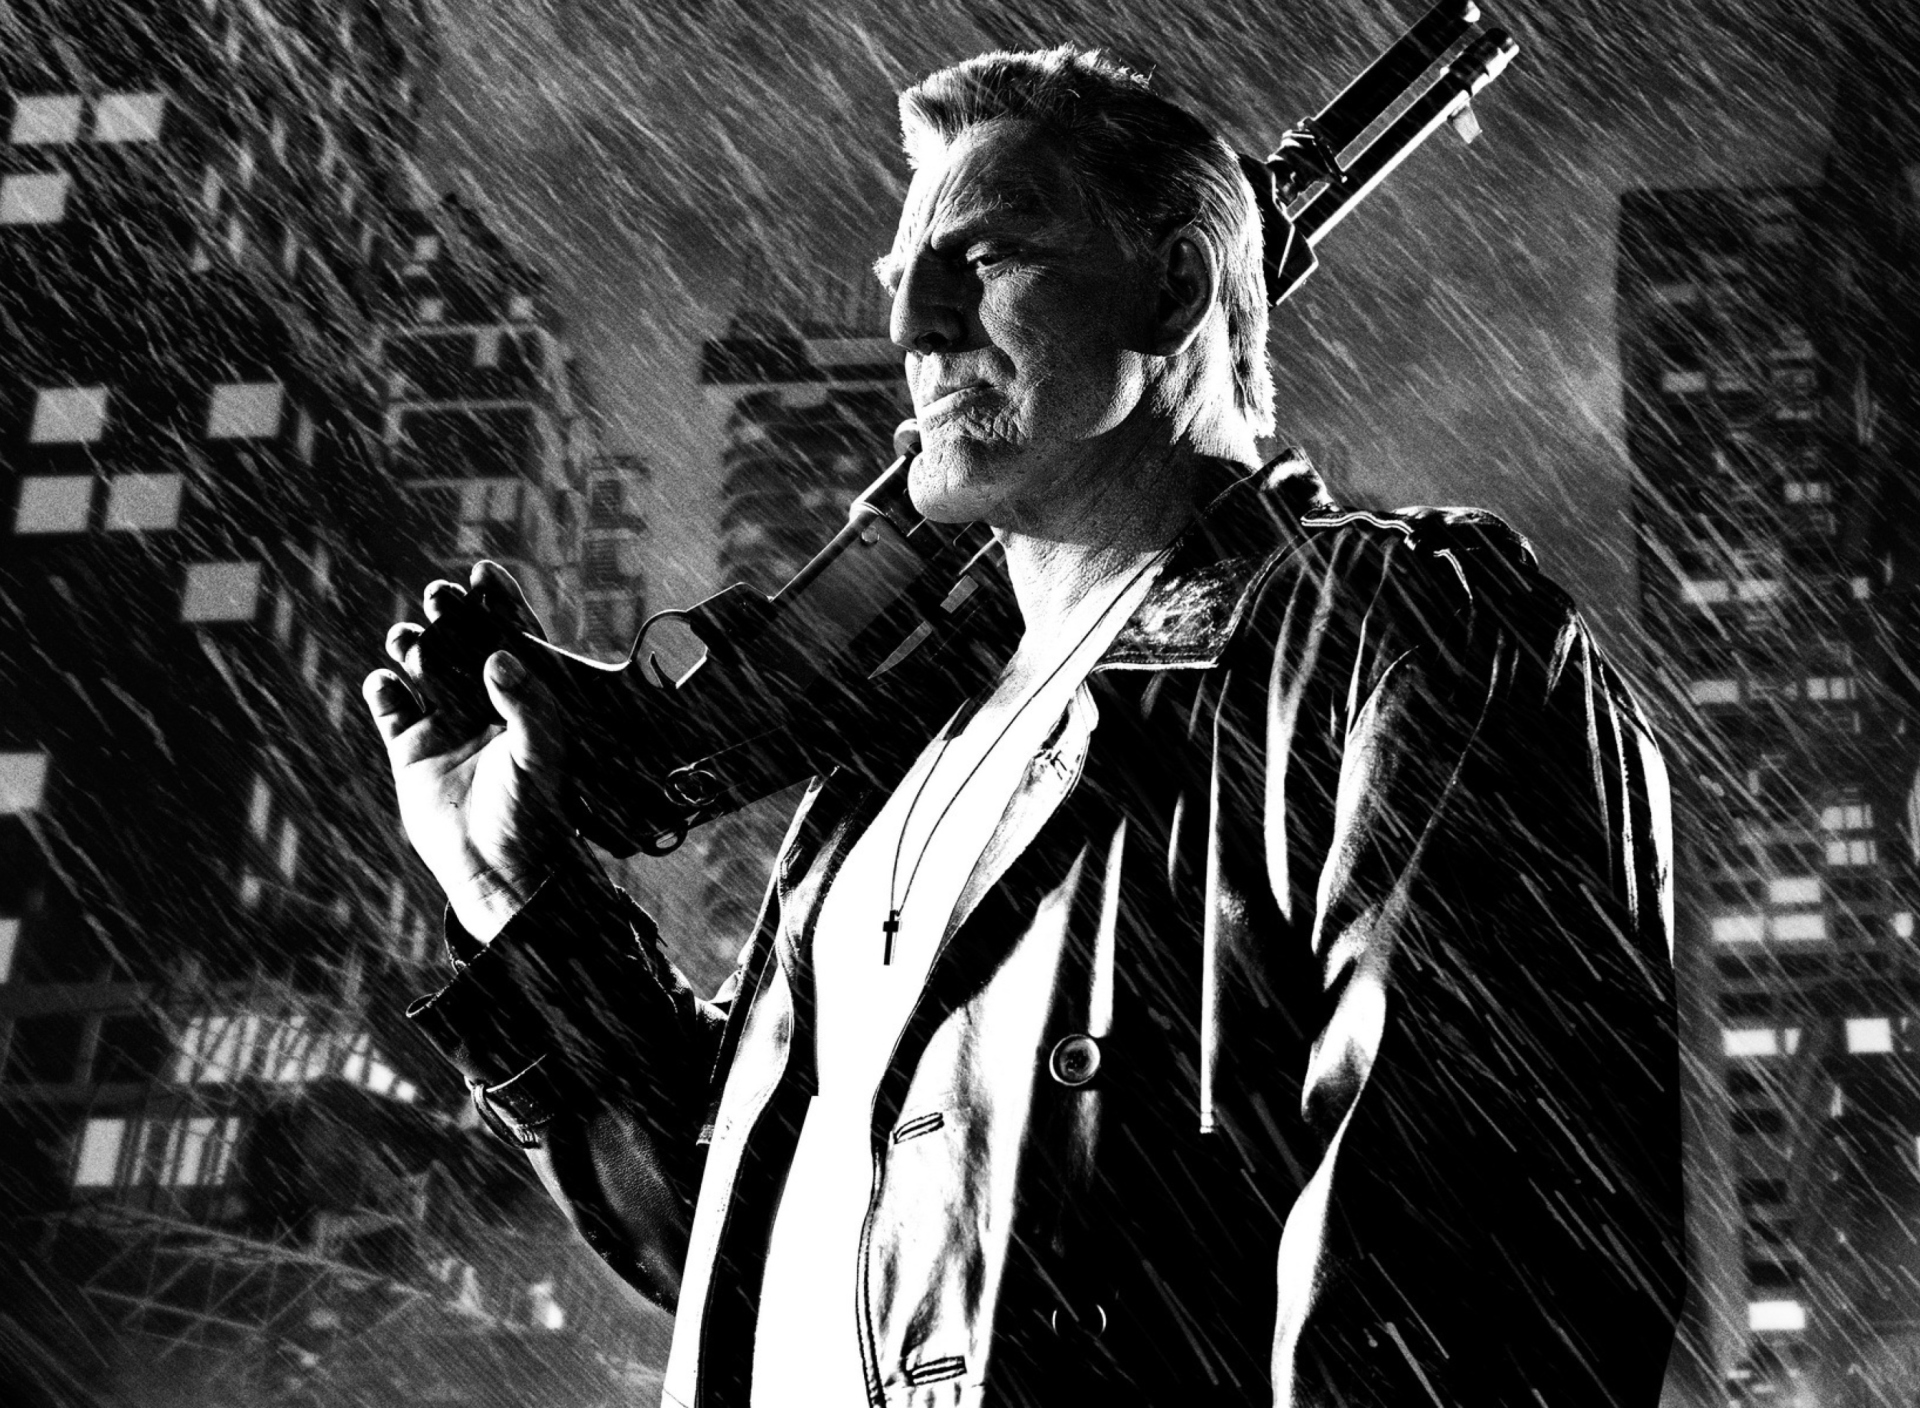 Sin City: A Dame to Kill For screenshot #1 1920x1408